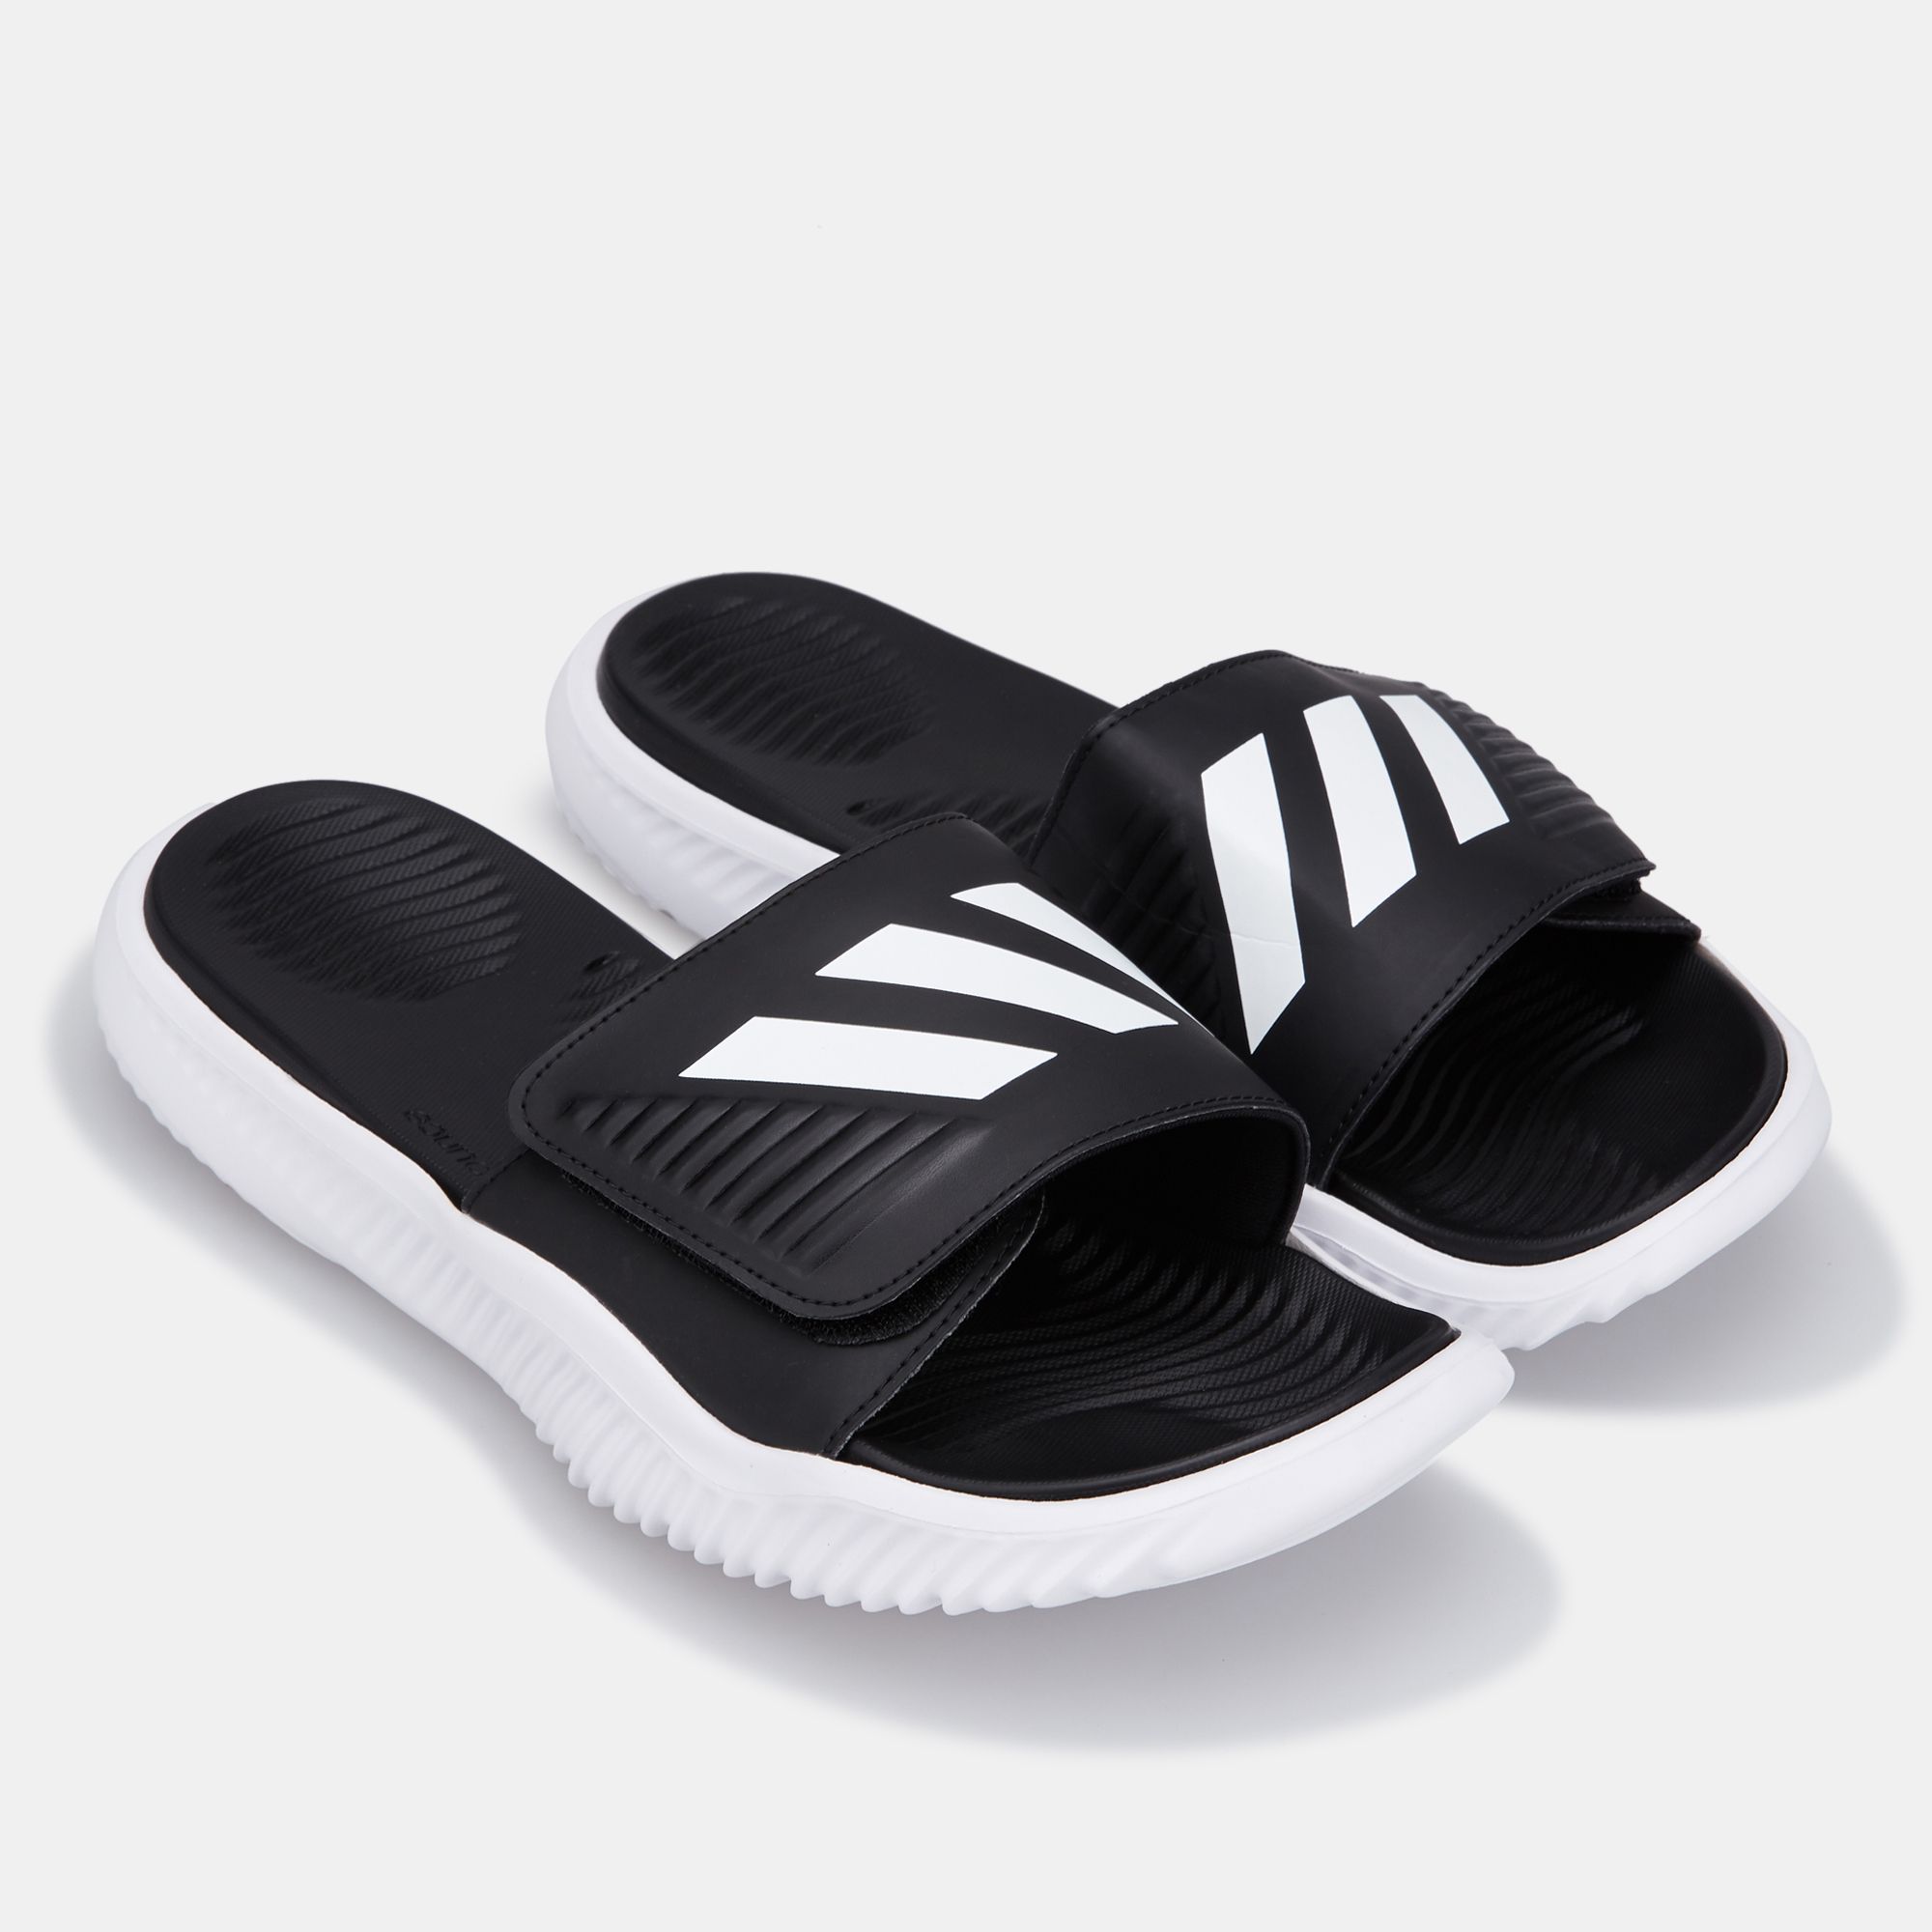 Adidas Bounce Slide On Sale, UP TO 60% OFF